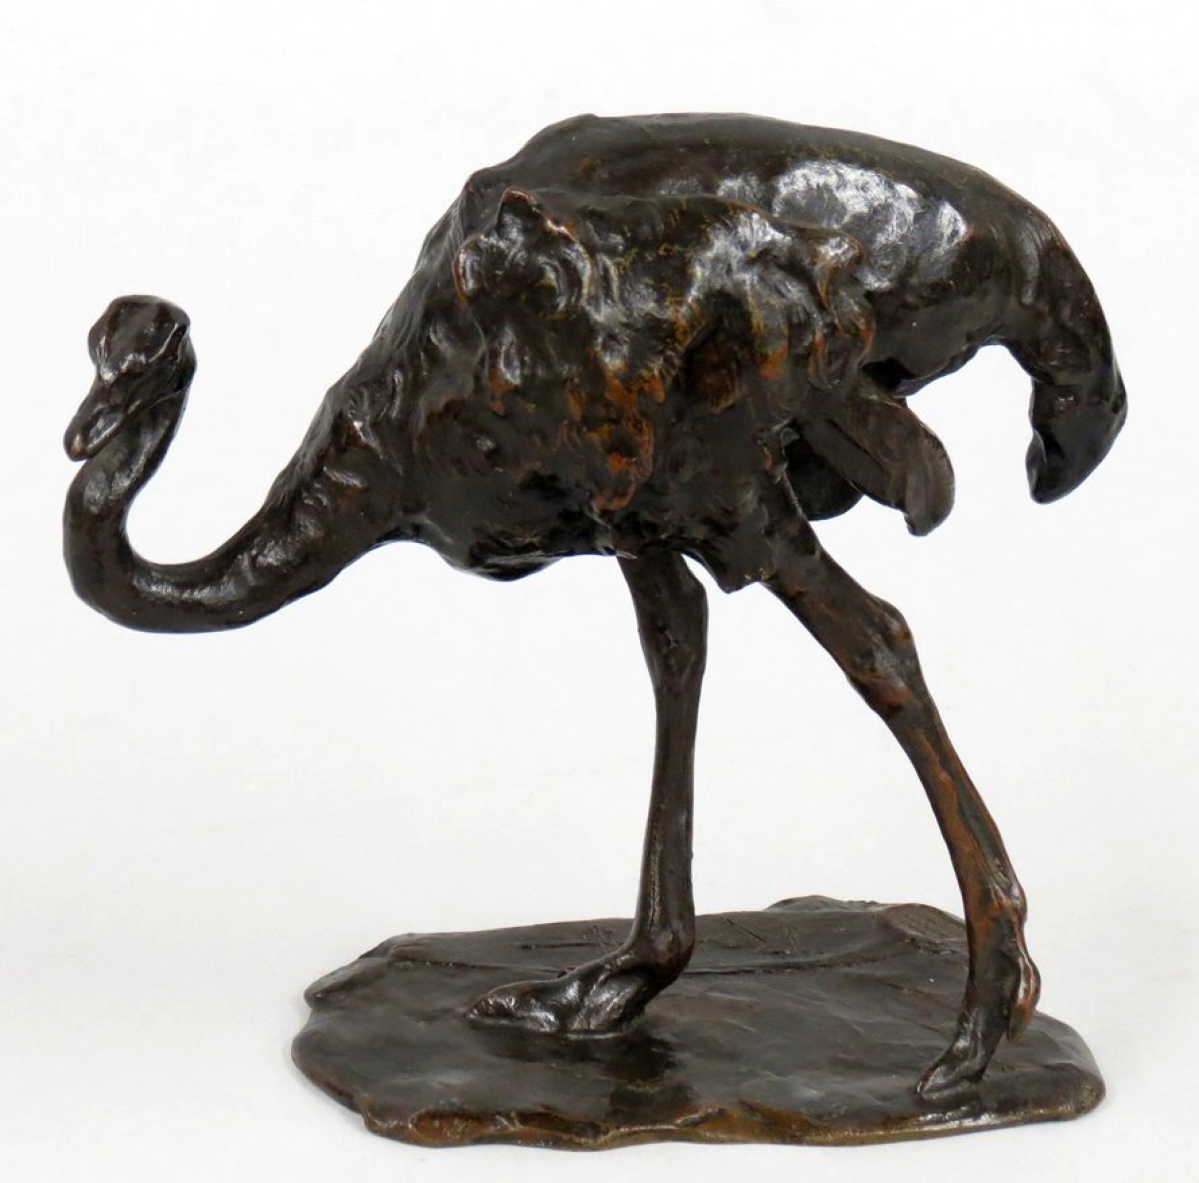 The top selling item in the sale at $24,000 was this 5-inch bronze ostrich by Rembrandt Bugatti, best known for his animal sculptures.